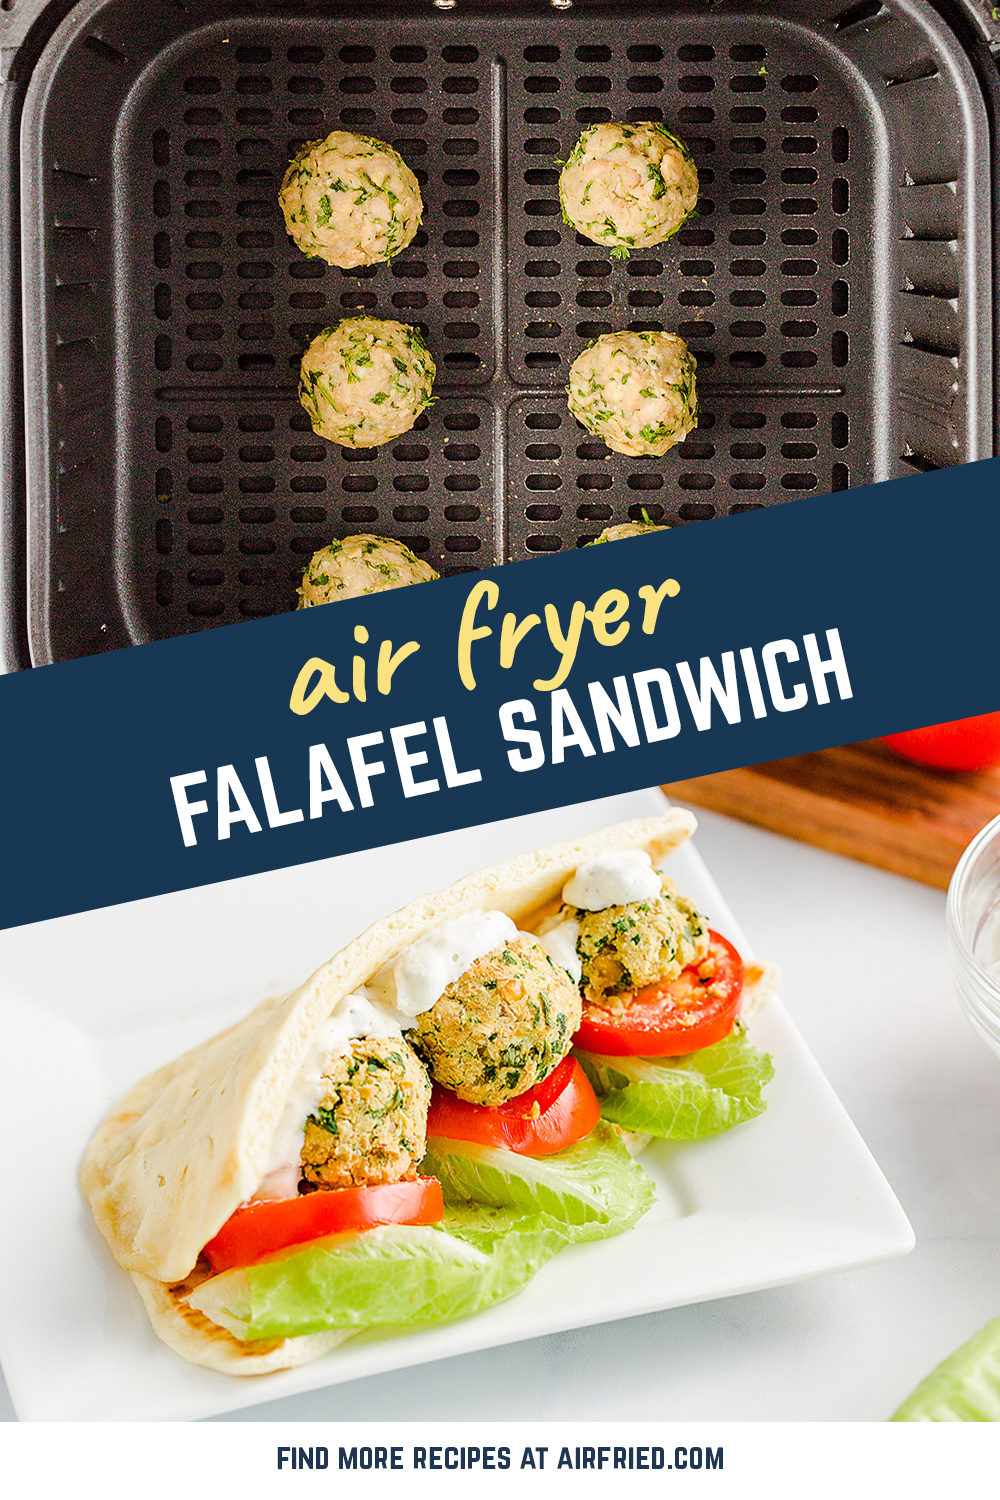 Try this recipe for your next meatless meal!  Falafel pitas are a filling, delicious lunch!  #airfryer #easyrecipes #falafel